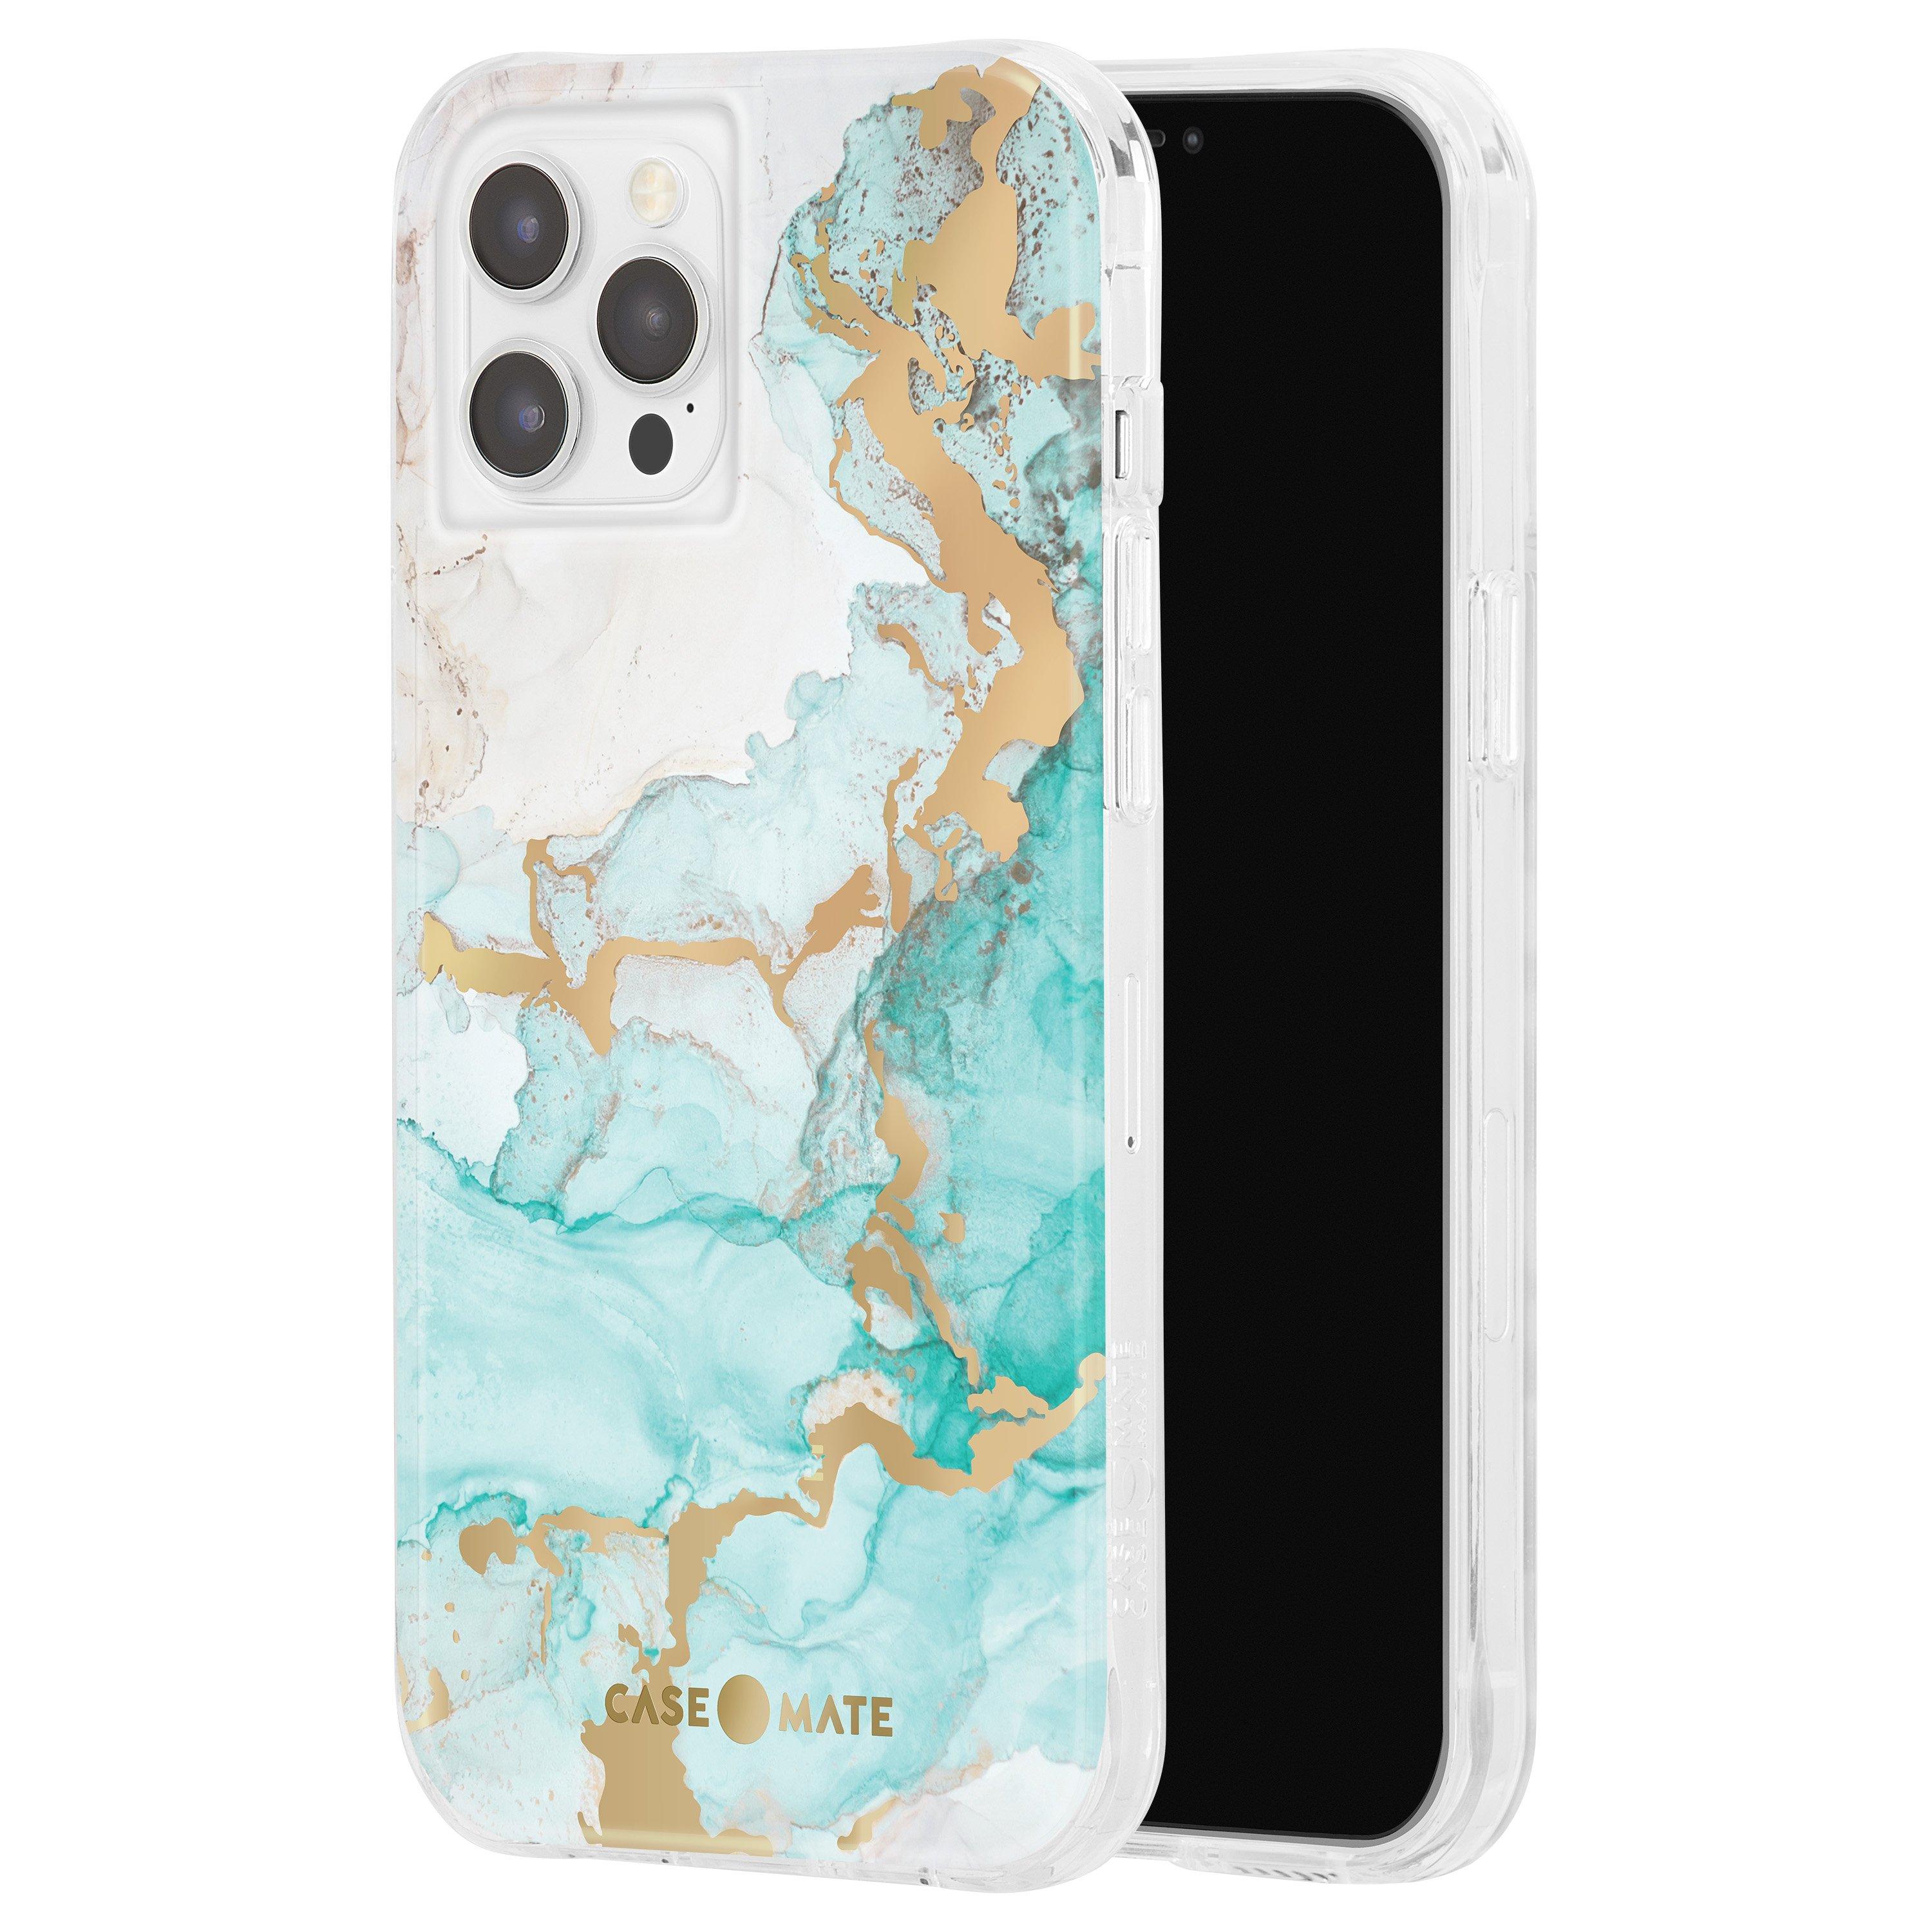 Holographic Marble Trunk Grey Case iPhone Case iPhone 12 Case 